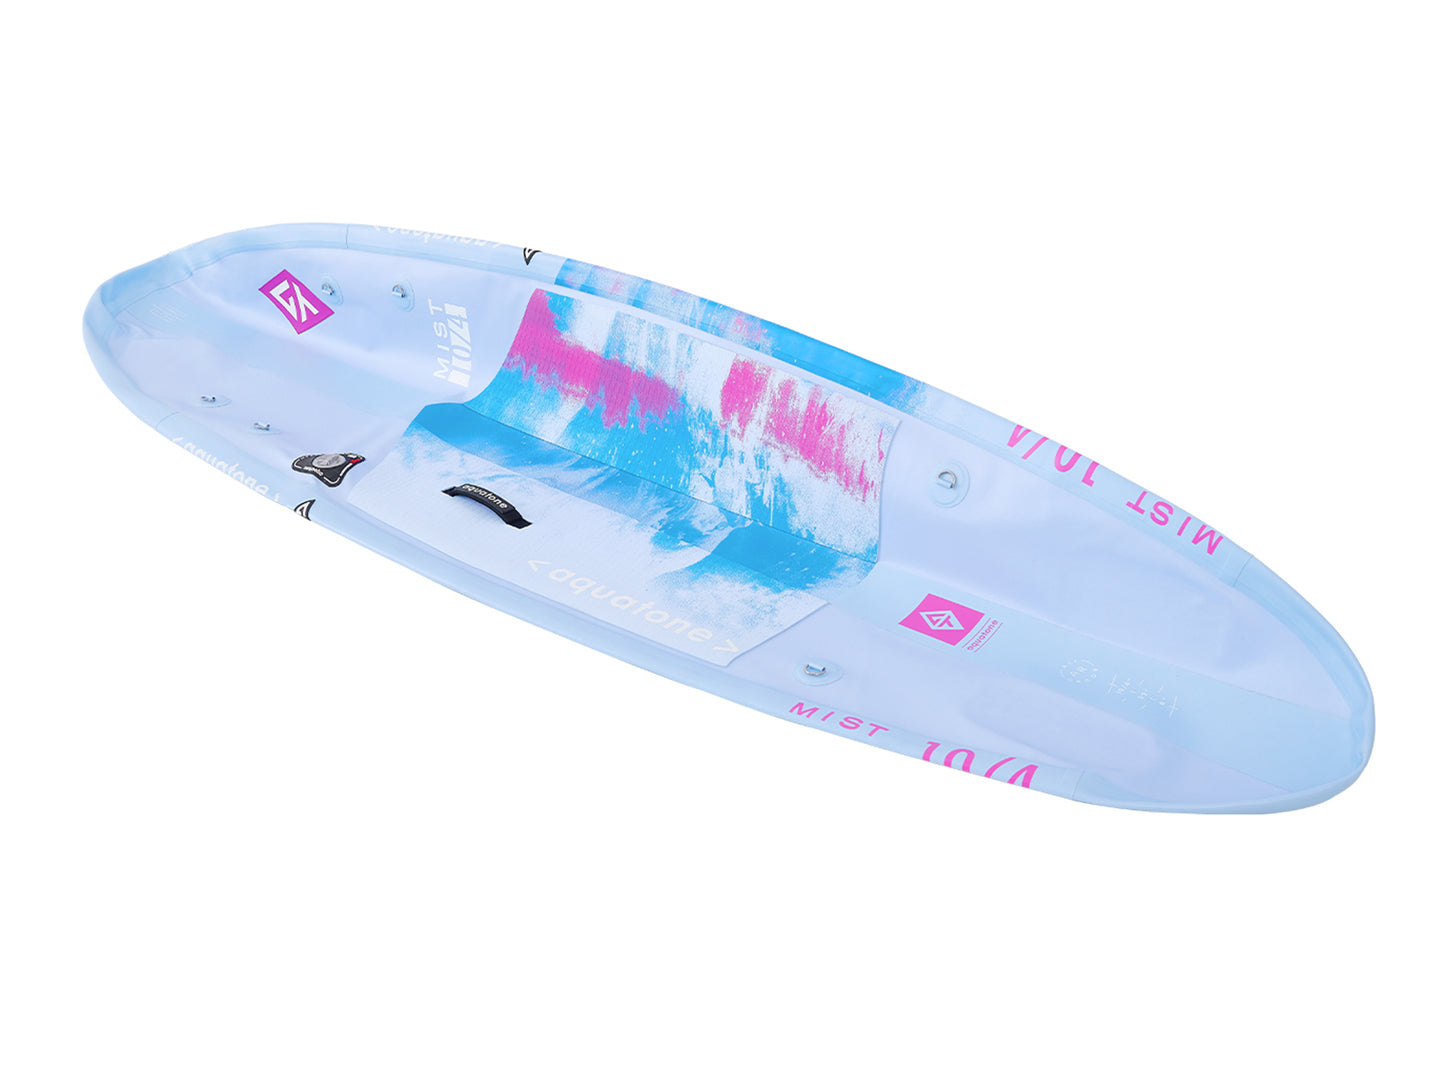 MIST 10'4" COMPACT SUP/ALL-ROUND